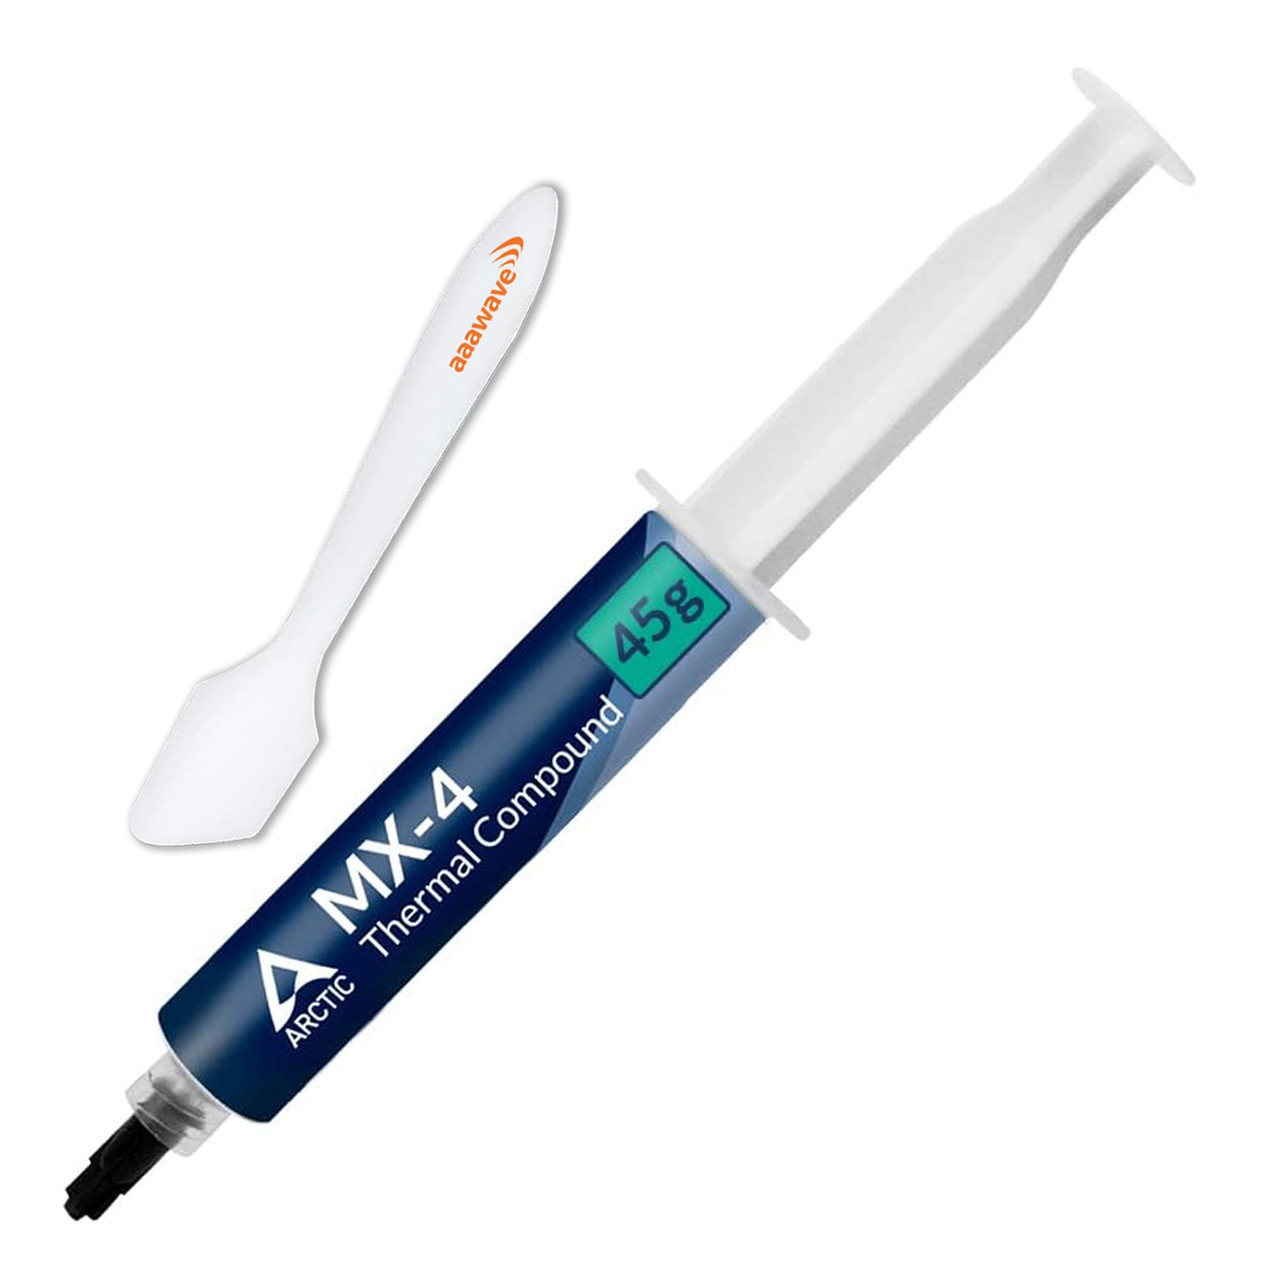 AAAwave ARCTIC MX-4 (incl. Spatula, 45 g) - Premium Performance Thermal Paste for All Processors, Very high Thermal Conductivity, Long Durability, Safe Application, Non-Conductive (ACTCP00024A+SP)